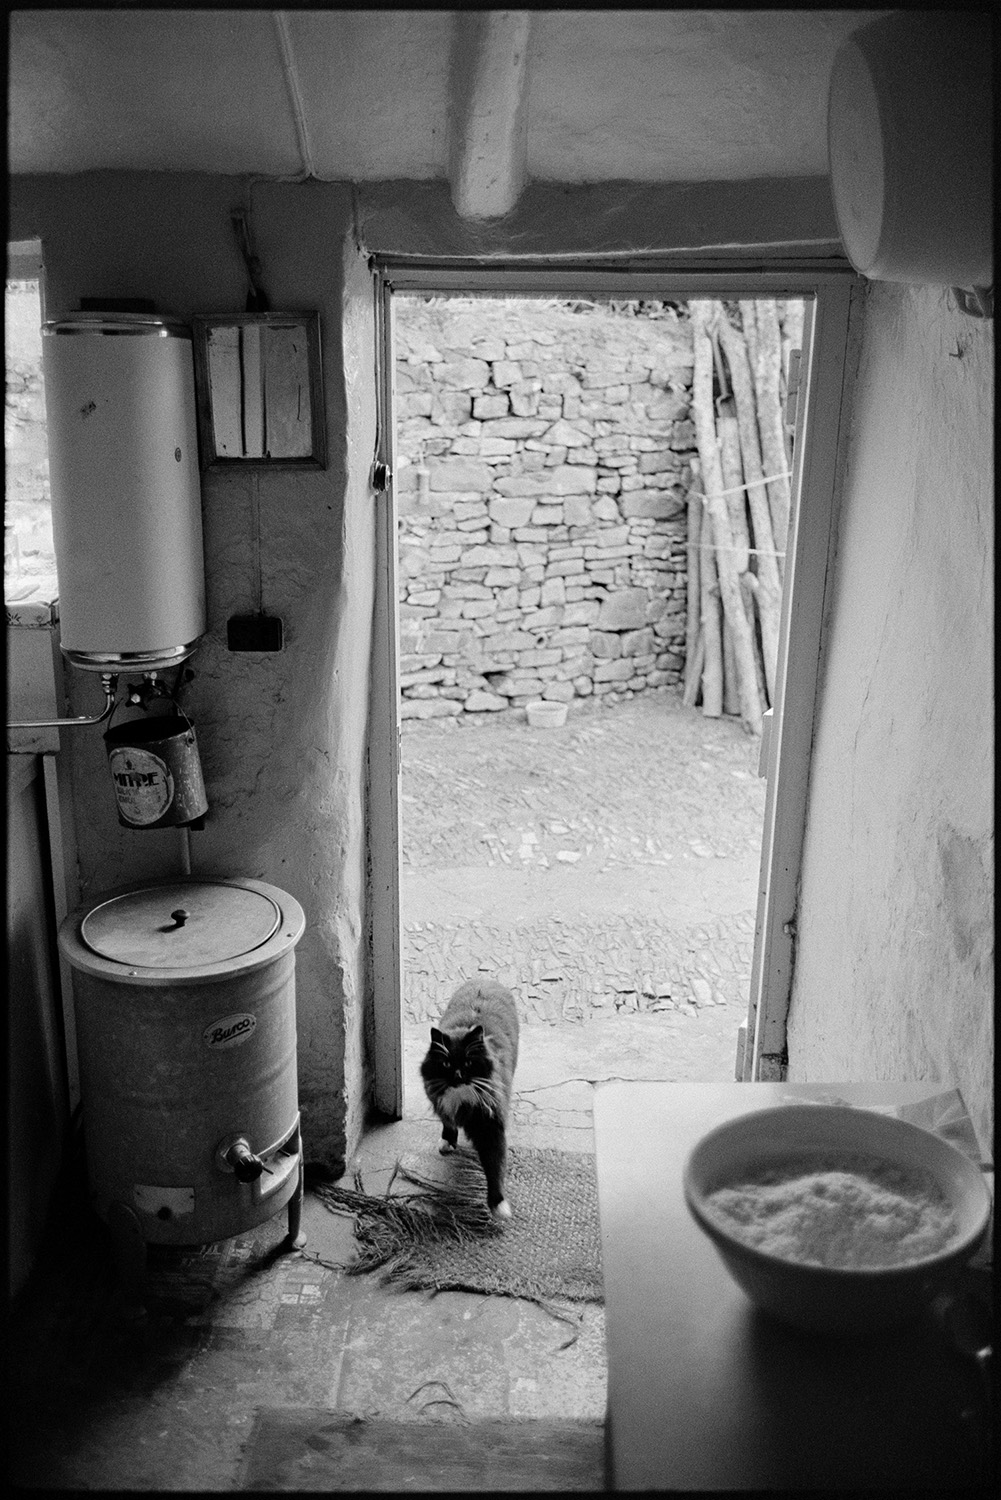 Cottage door with boiler for hot water, geyser, cat entering.
[A view from the interior of a room in Chaplands Cottage, Beaford containing a boiler and a geyser, looking through the open doorway into the yard outside. A cat is entering the room.]